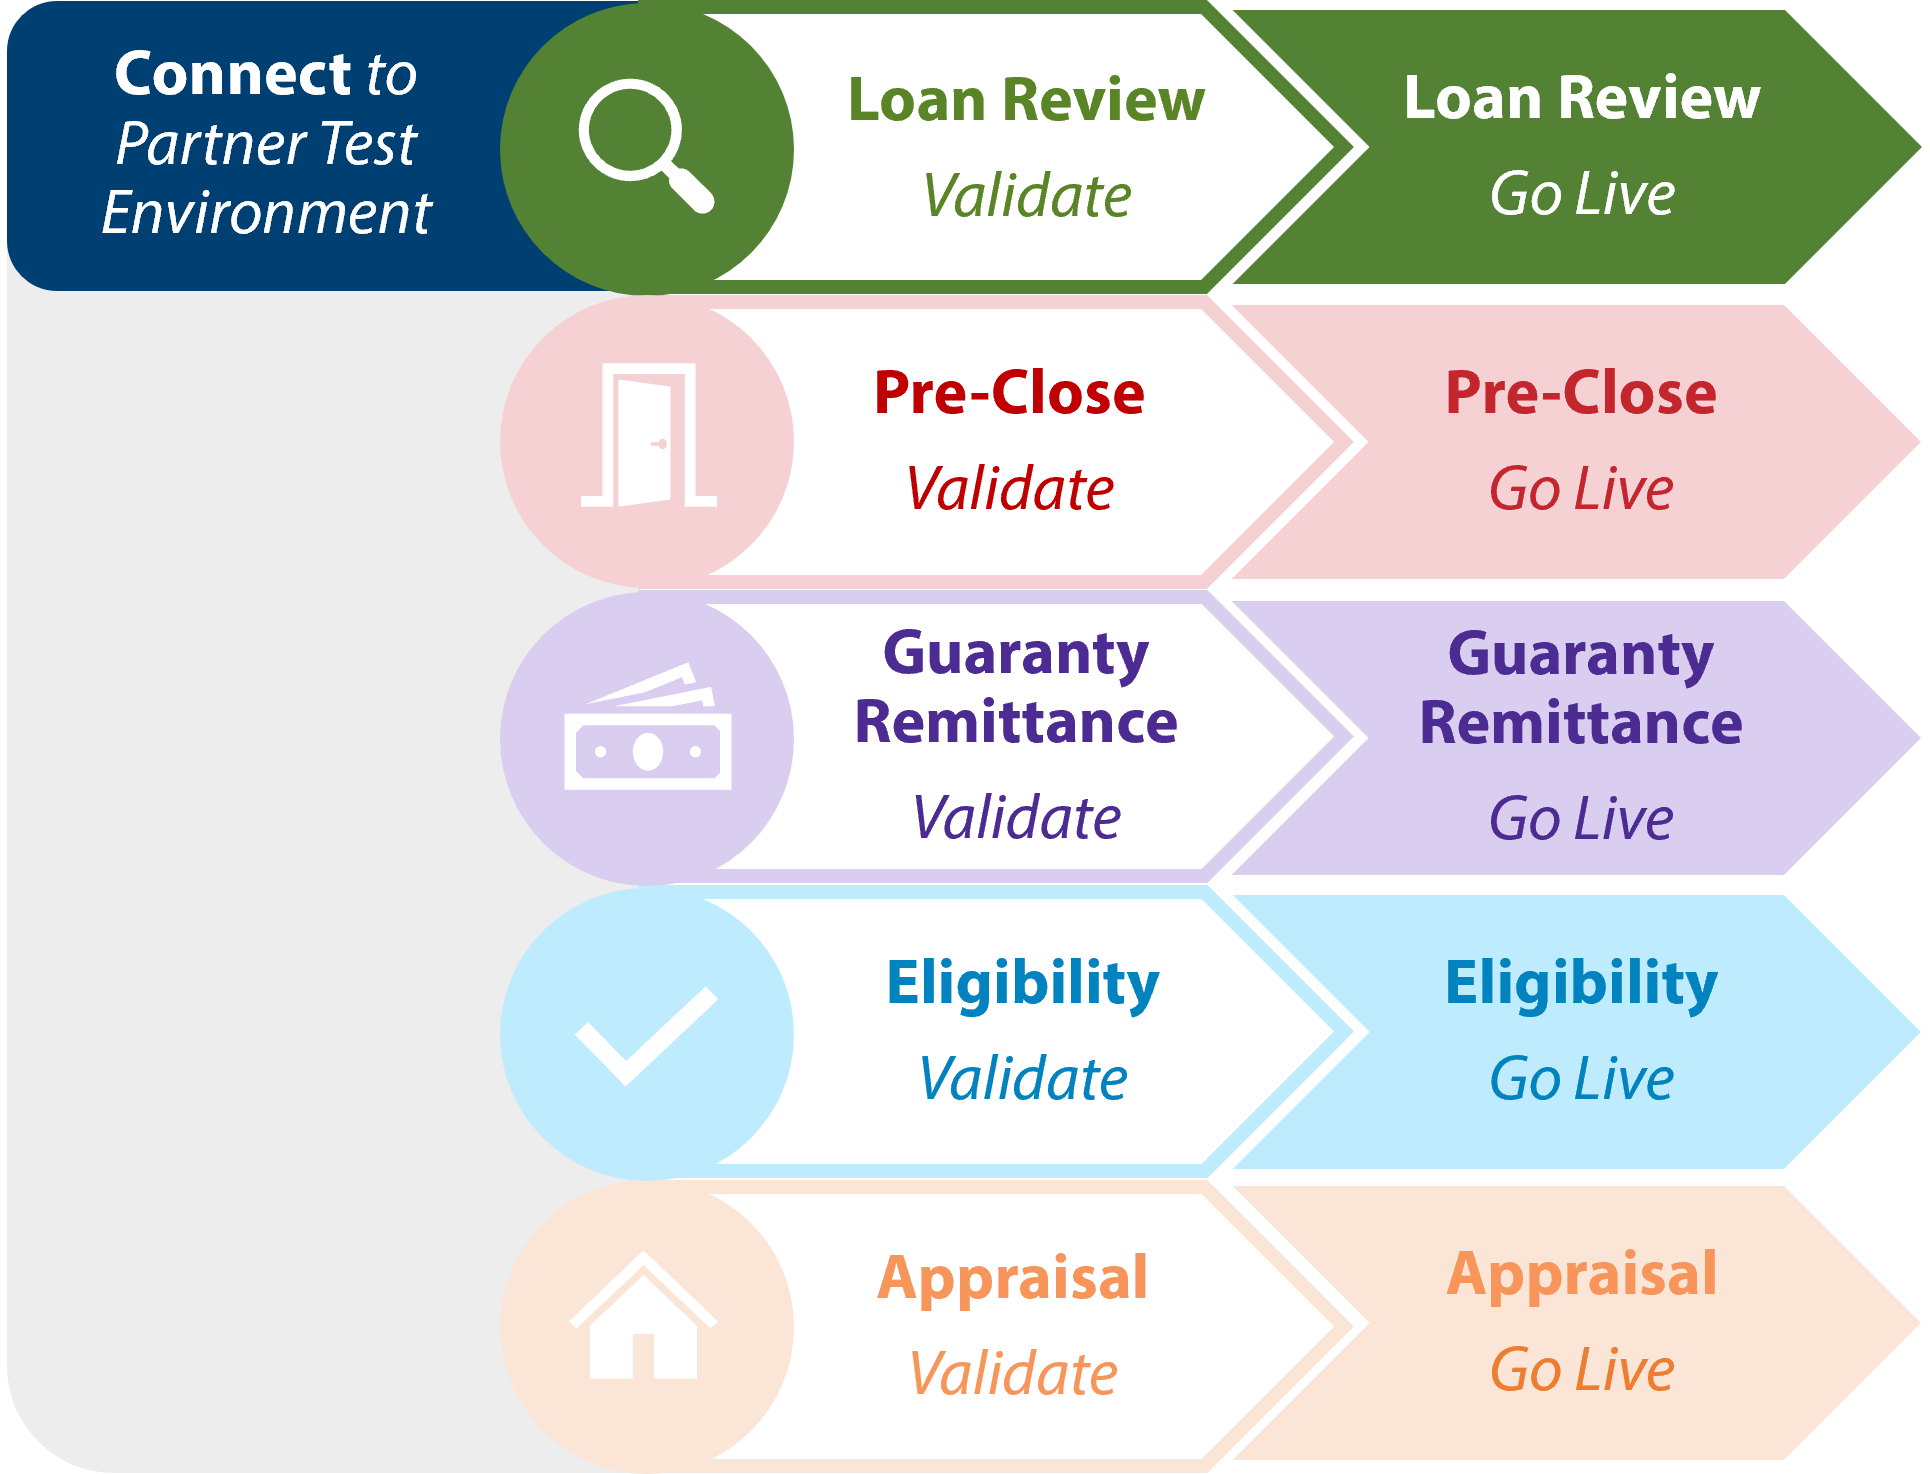 Getting started loan review diagram. Connect to partner test environment